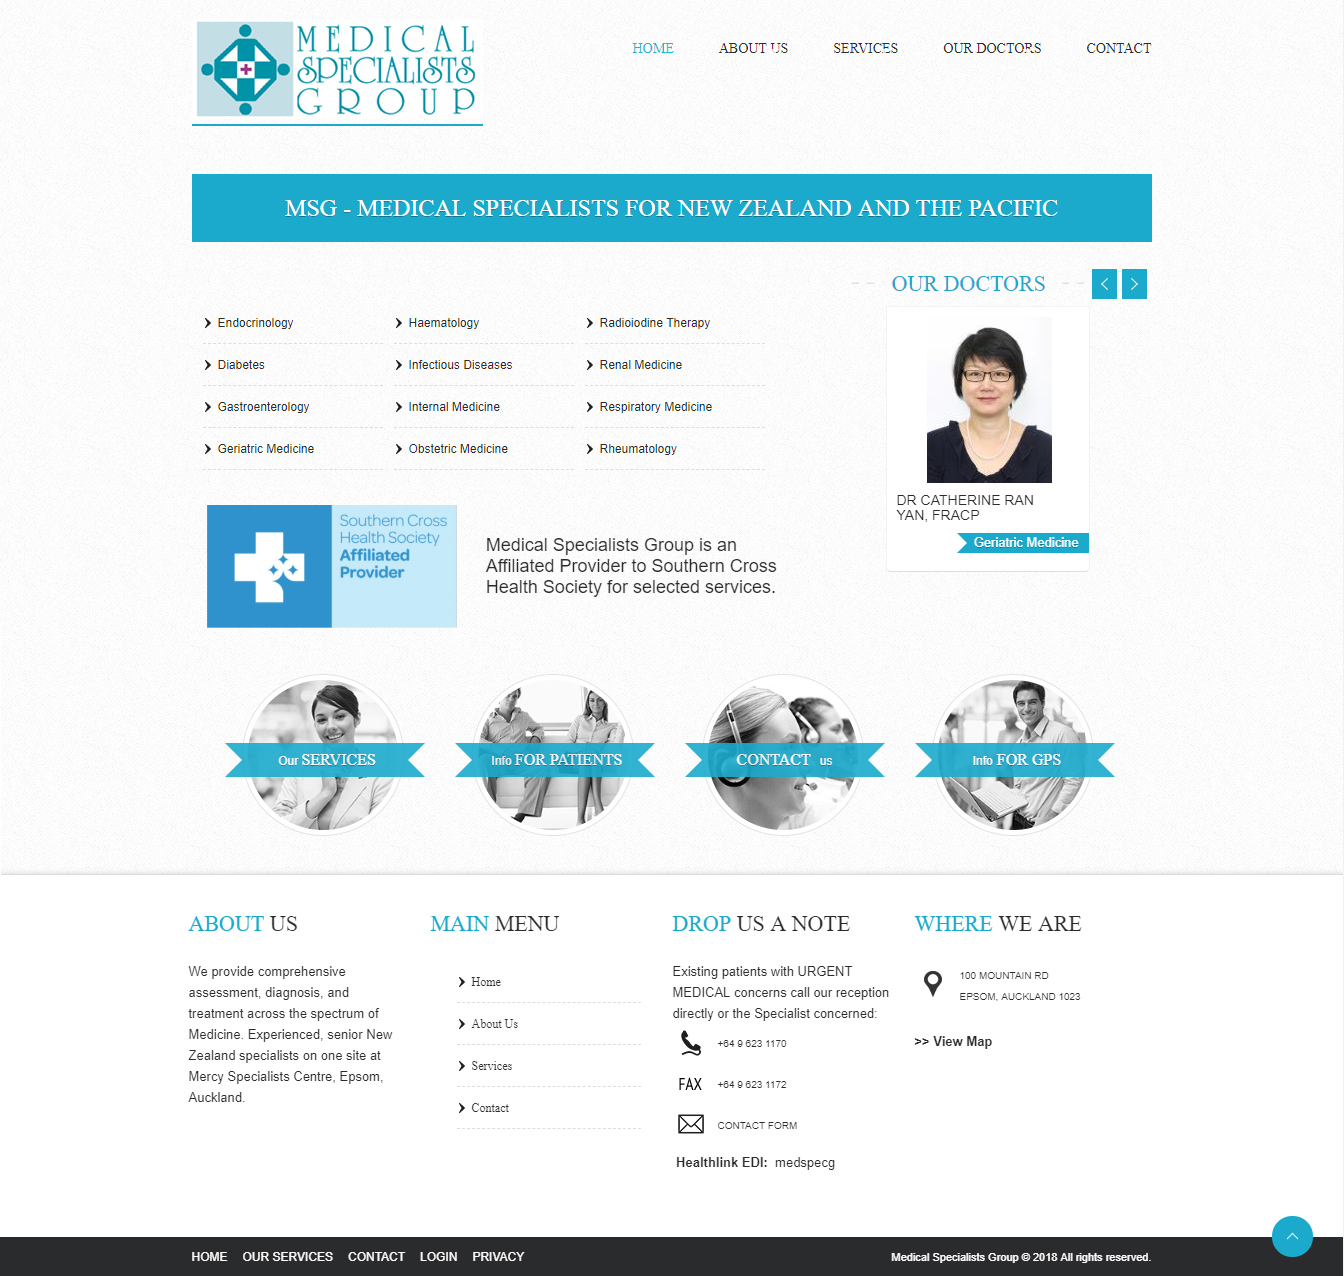 Medical Specialists Group